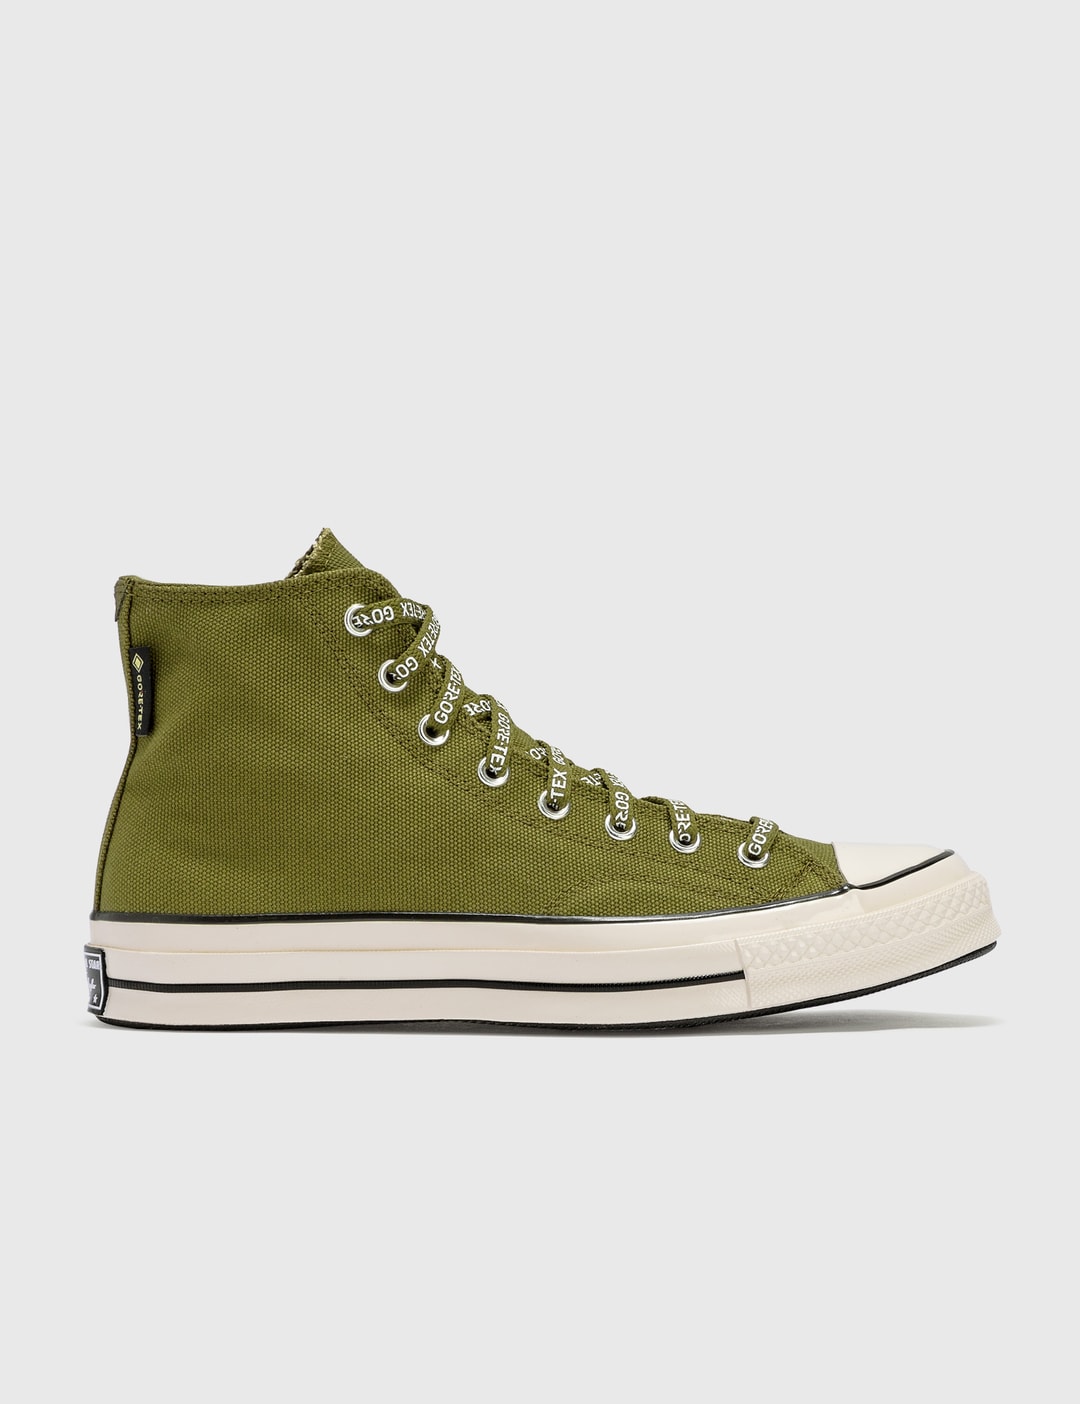 Converse - Chuck 70 Gore-Tex | HBX - Globally Curated Fashion and ...